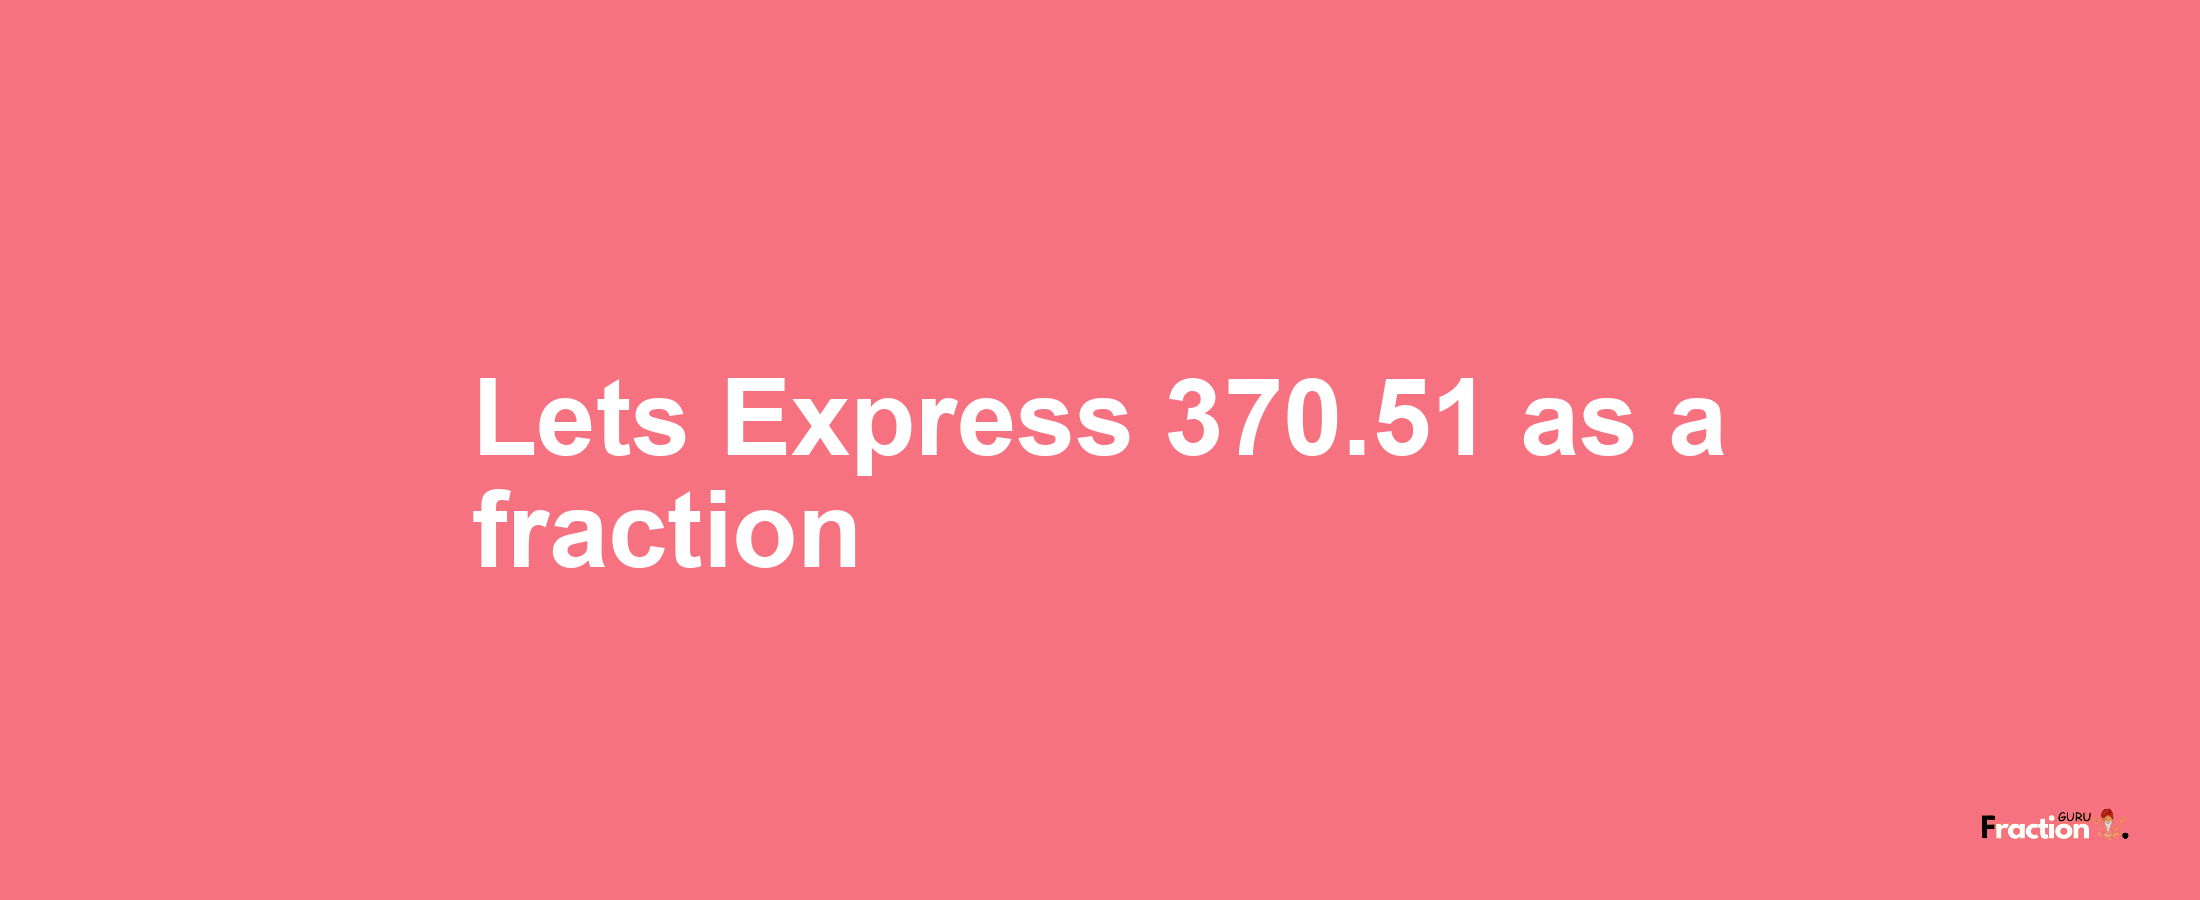 Lets Express 370.51 as afraction